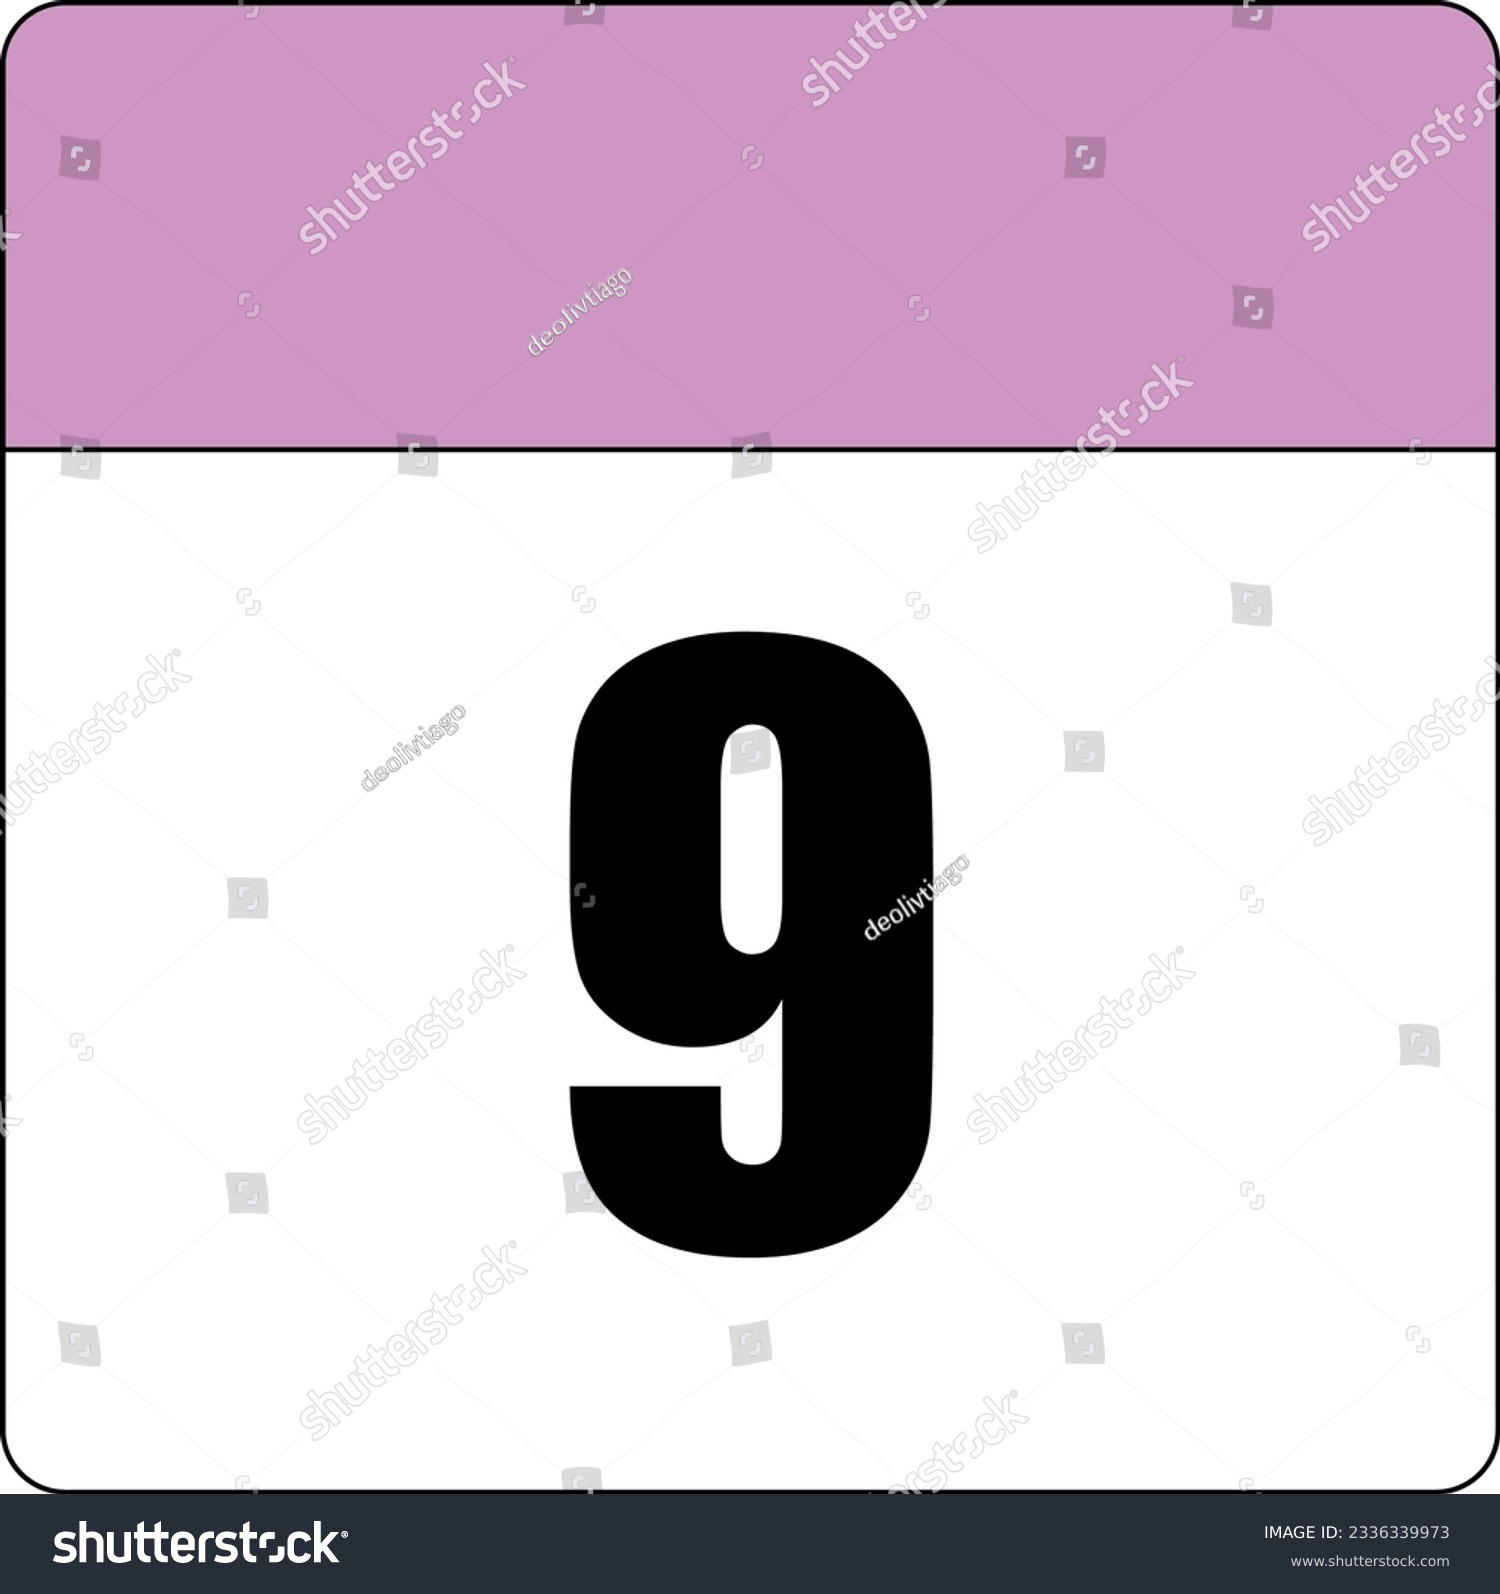 SVG of simple calendar icon with pink header and white background showing 9th day number nine svg